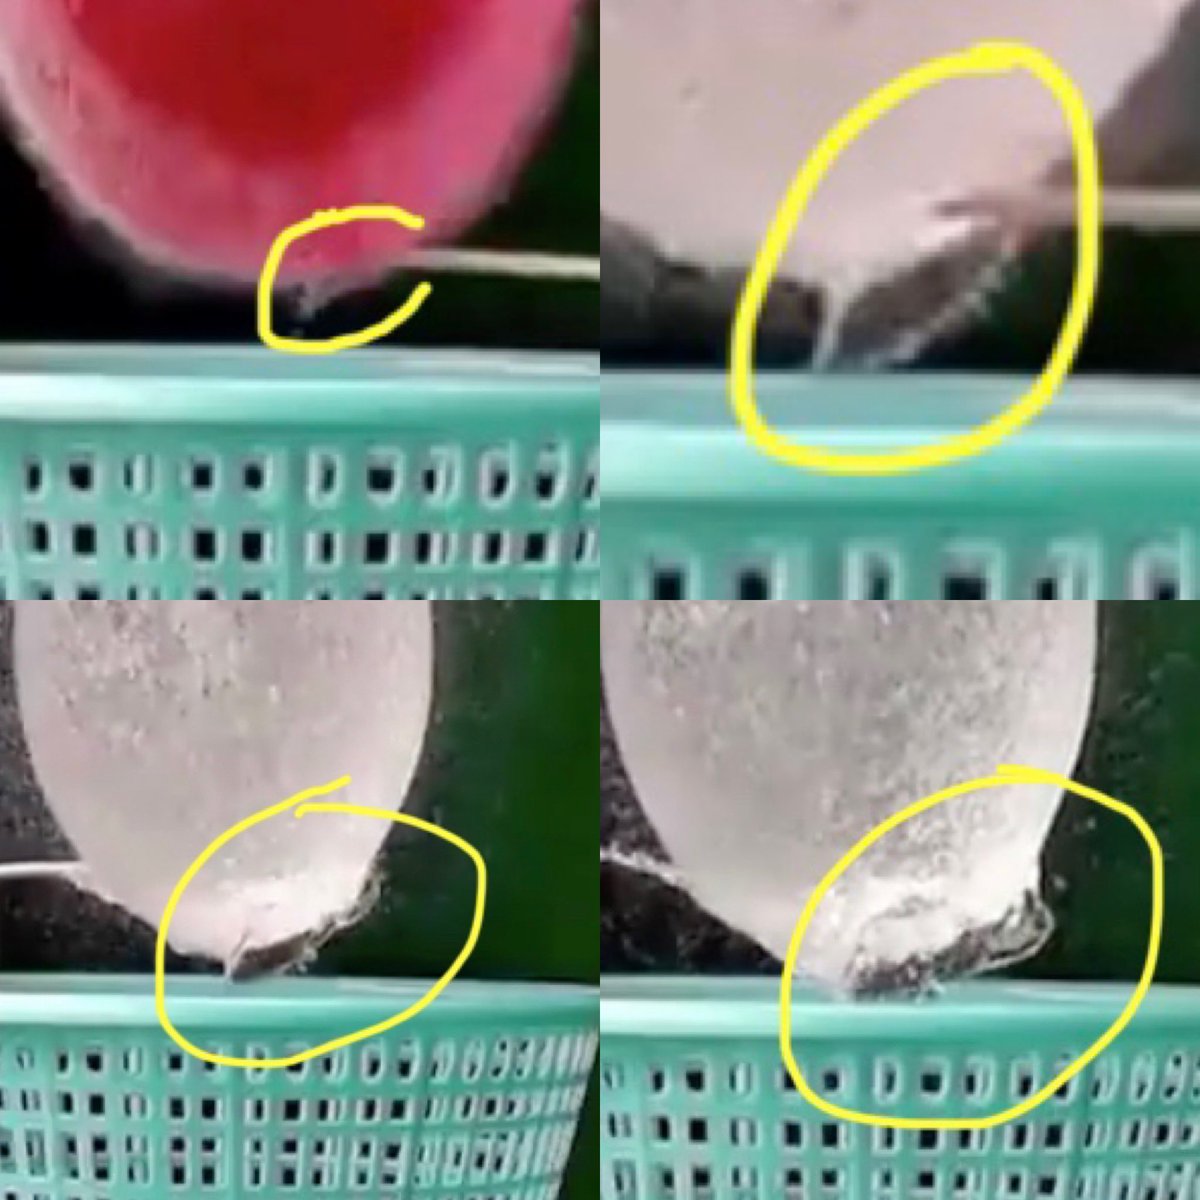 6/ Next cool thing. Look at where the pointy stick pierces the balloon. The ballon instantly pulls away, so now the stick is splashing into pure water. What does the water do? It makes a beautiful crown-shaped splash! So gorgeous! For comparison...